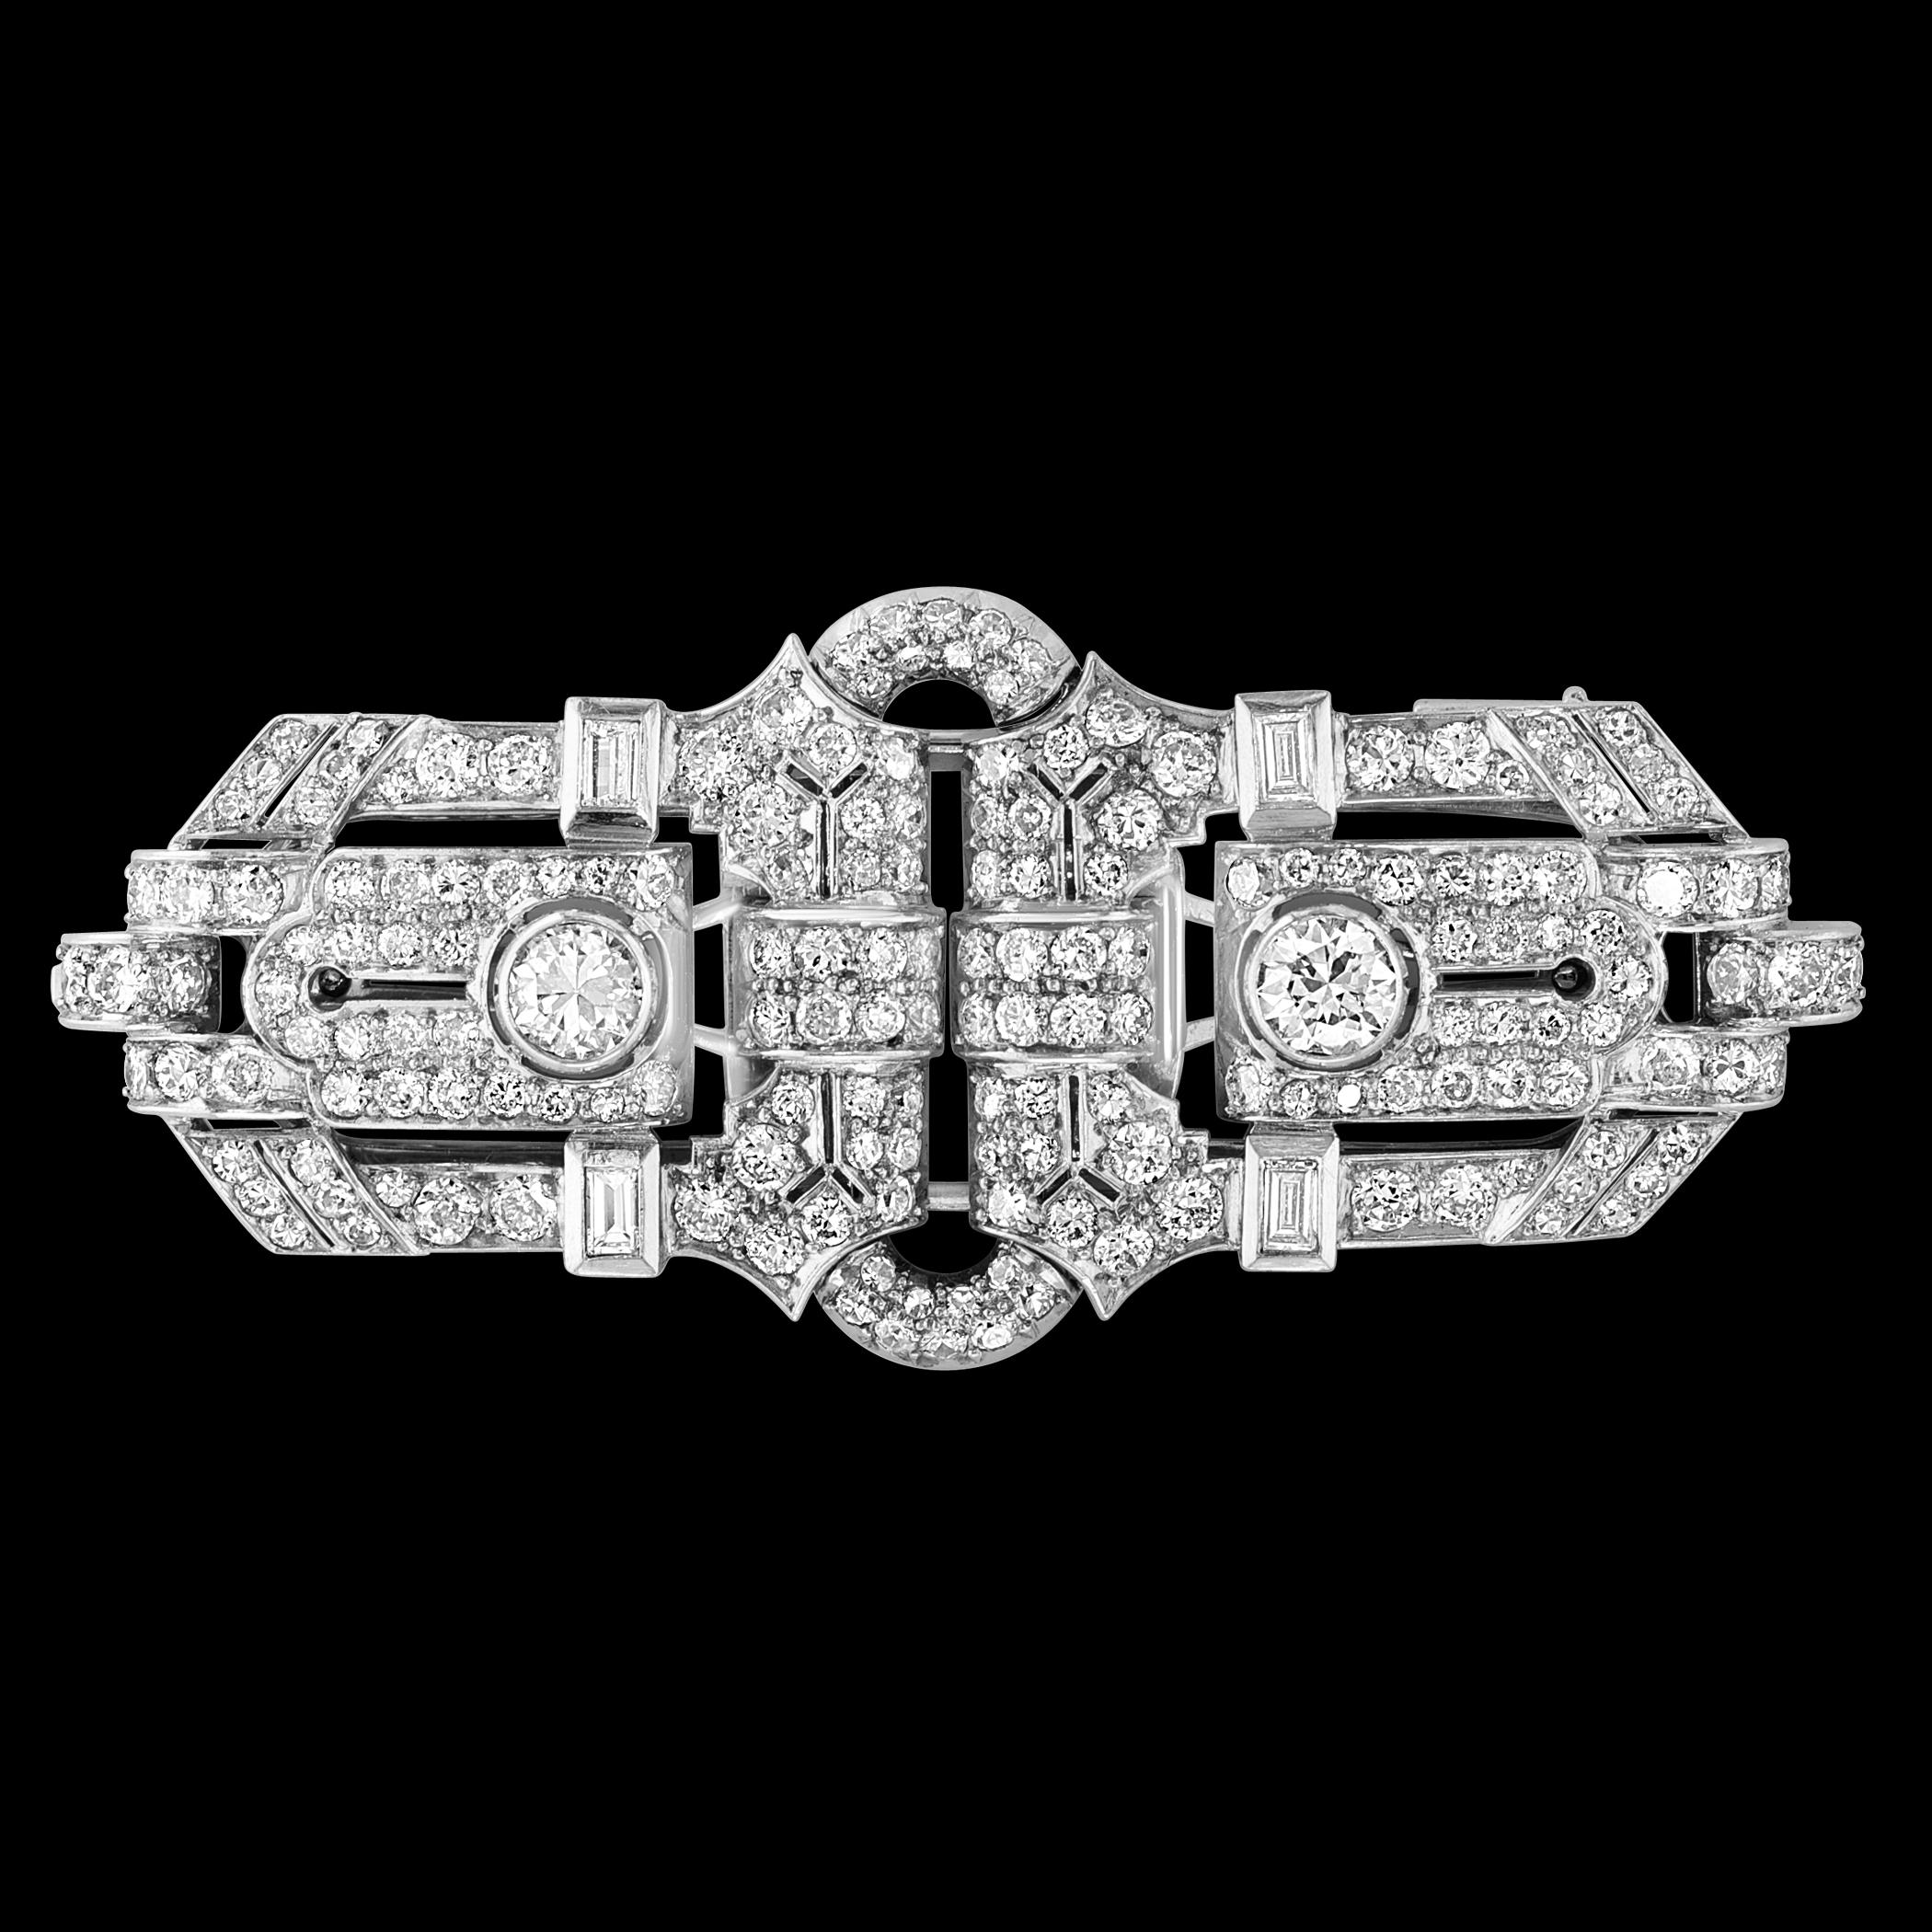 An absolutely exquisite platinum and diamond pin/fur clips from the Art Deco era! This wonderful and unusual piece is made of 26 gm of  platinum and encrusted with Approximately 12 carats of sparkling diamonds. Comprised of 2 fur clips that are